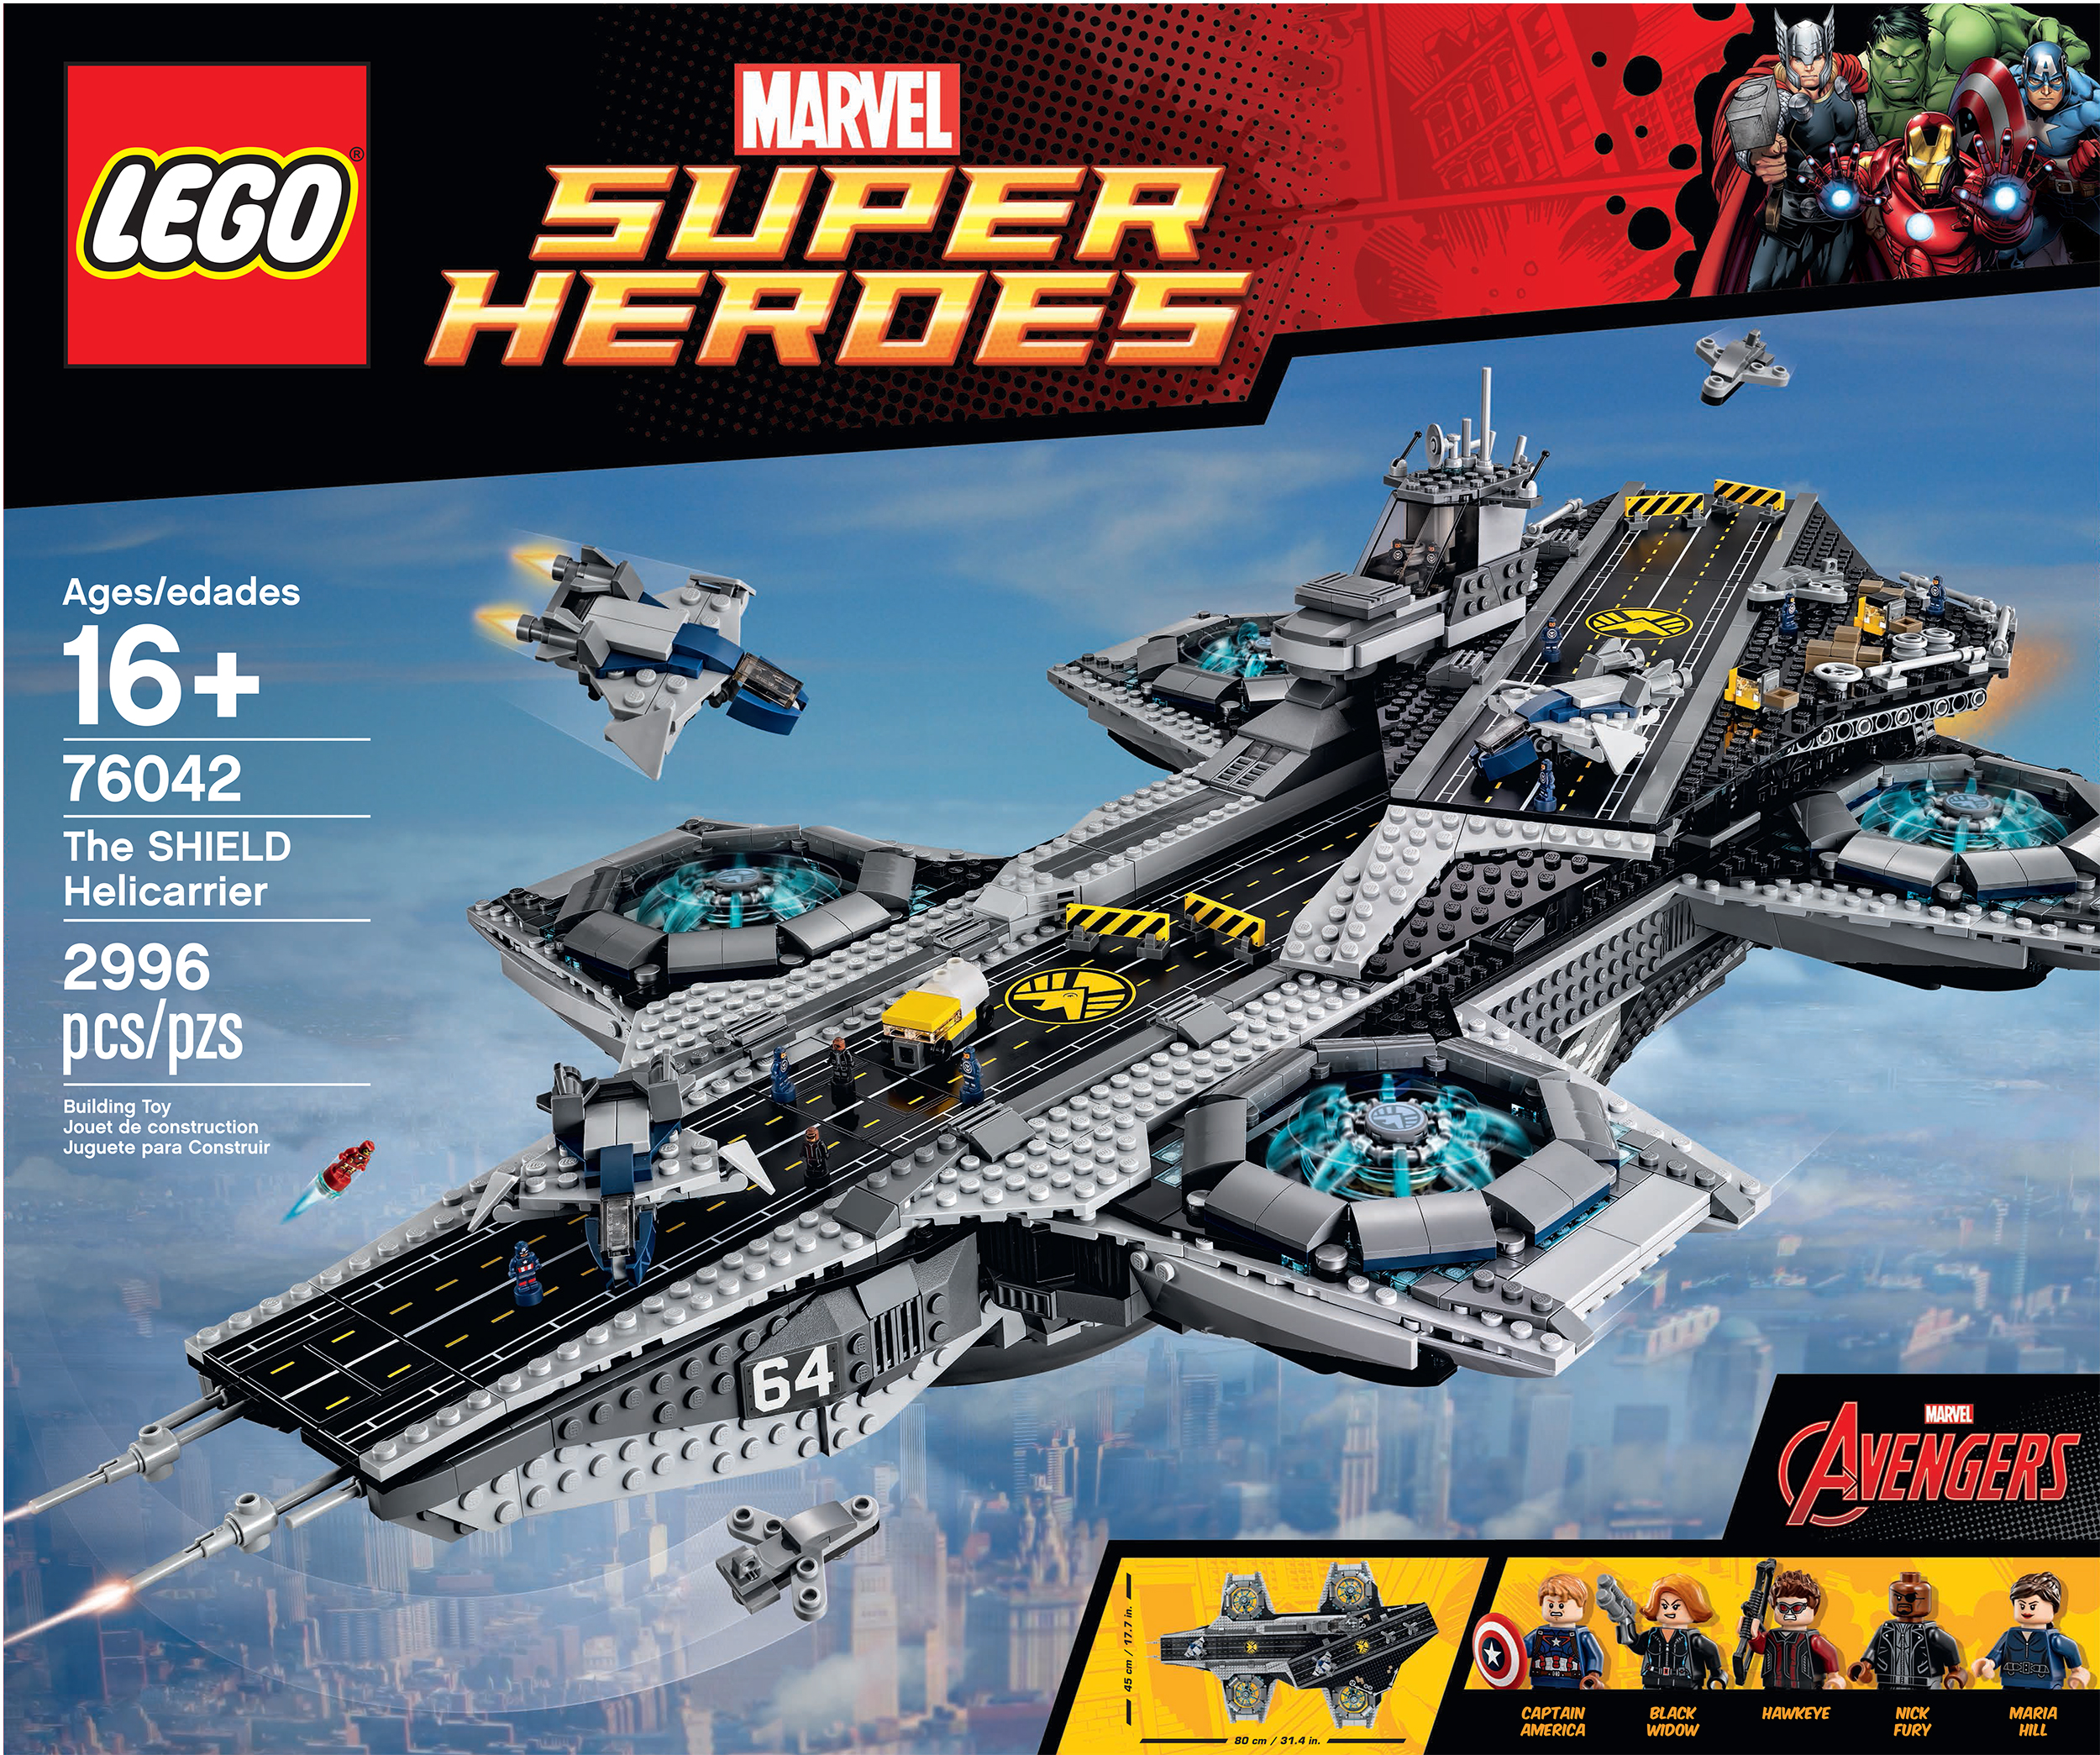 First Images Of UCS SHIELD Helicarrier - FBTB